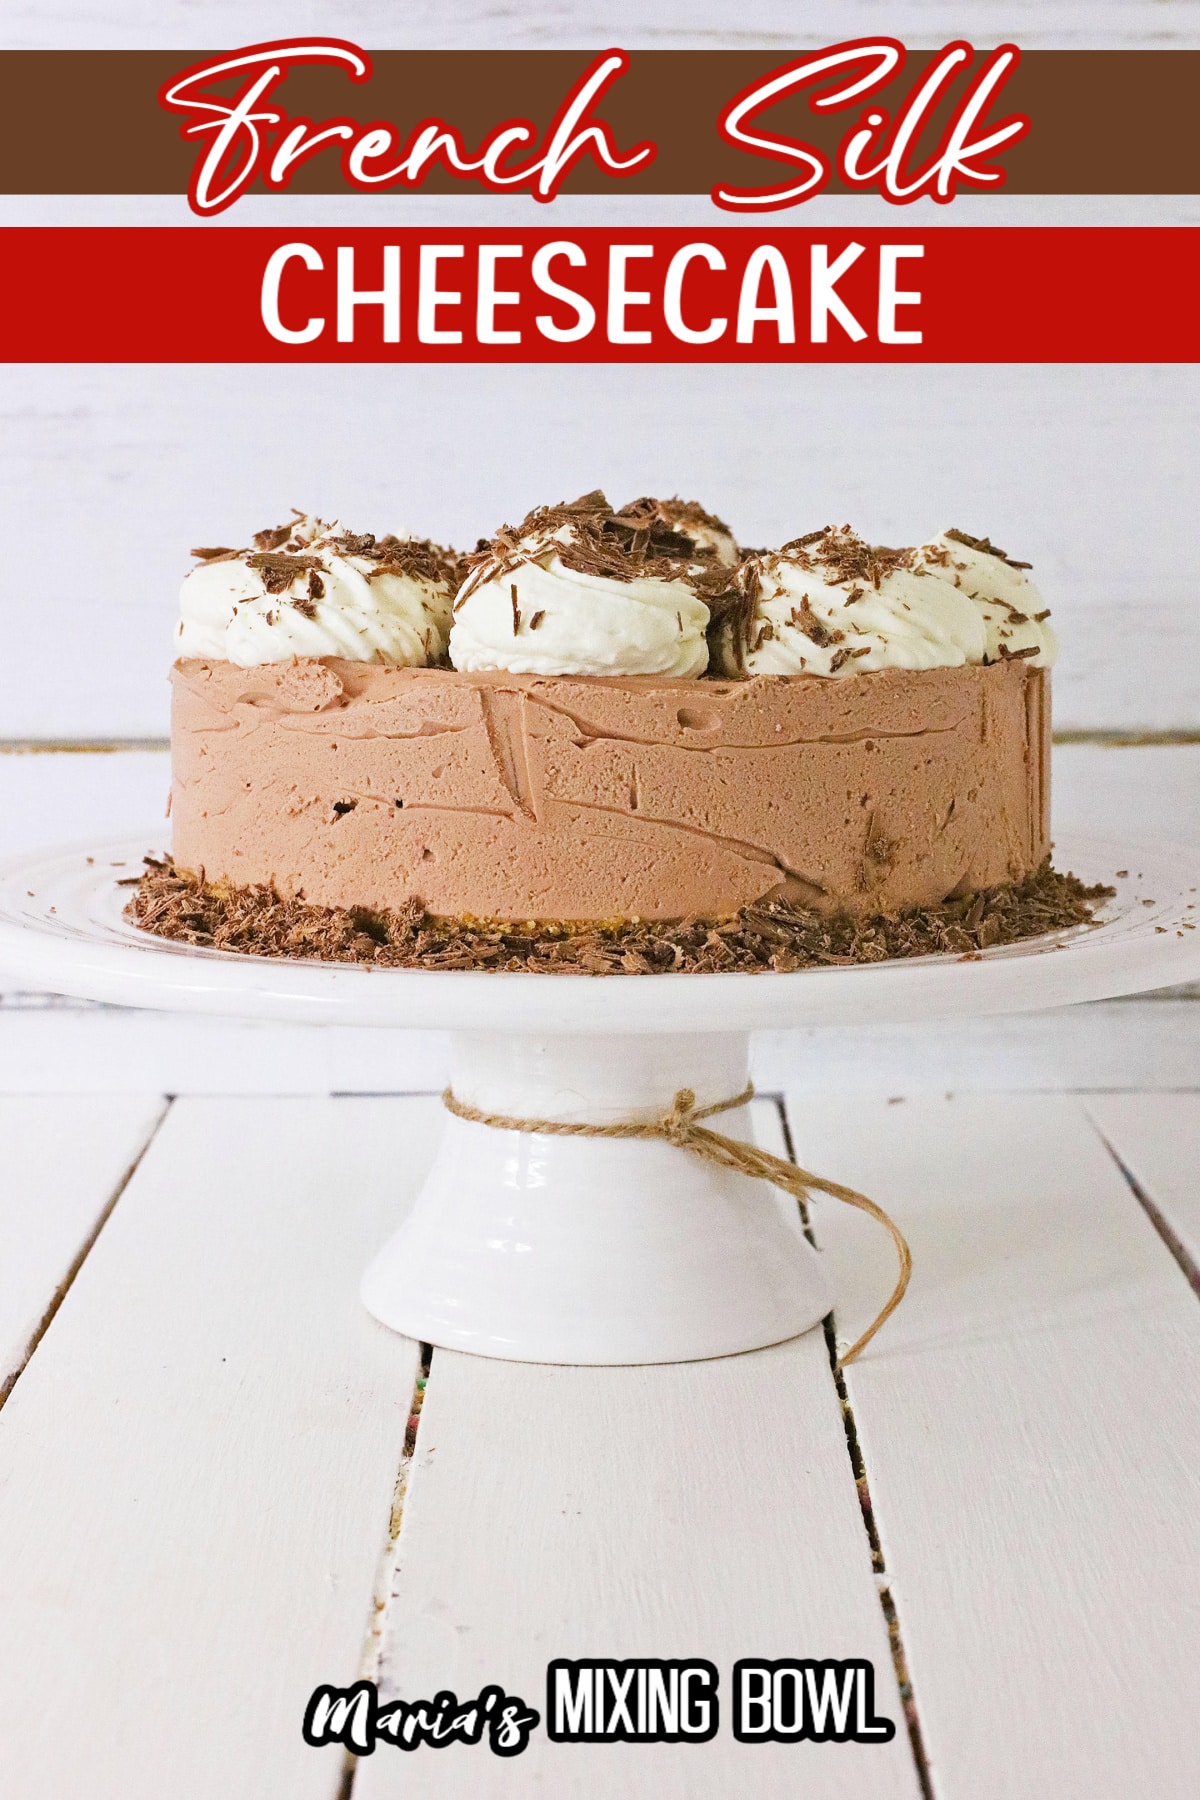 whole french silk cheescake on a white cake plate with the name in text